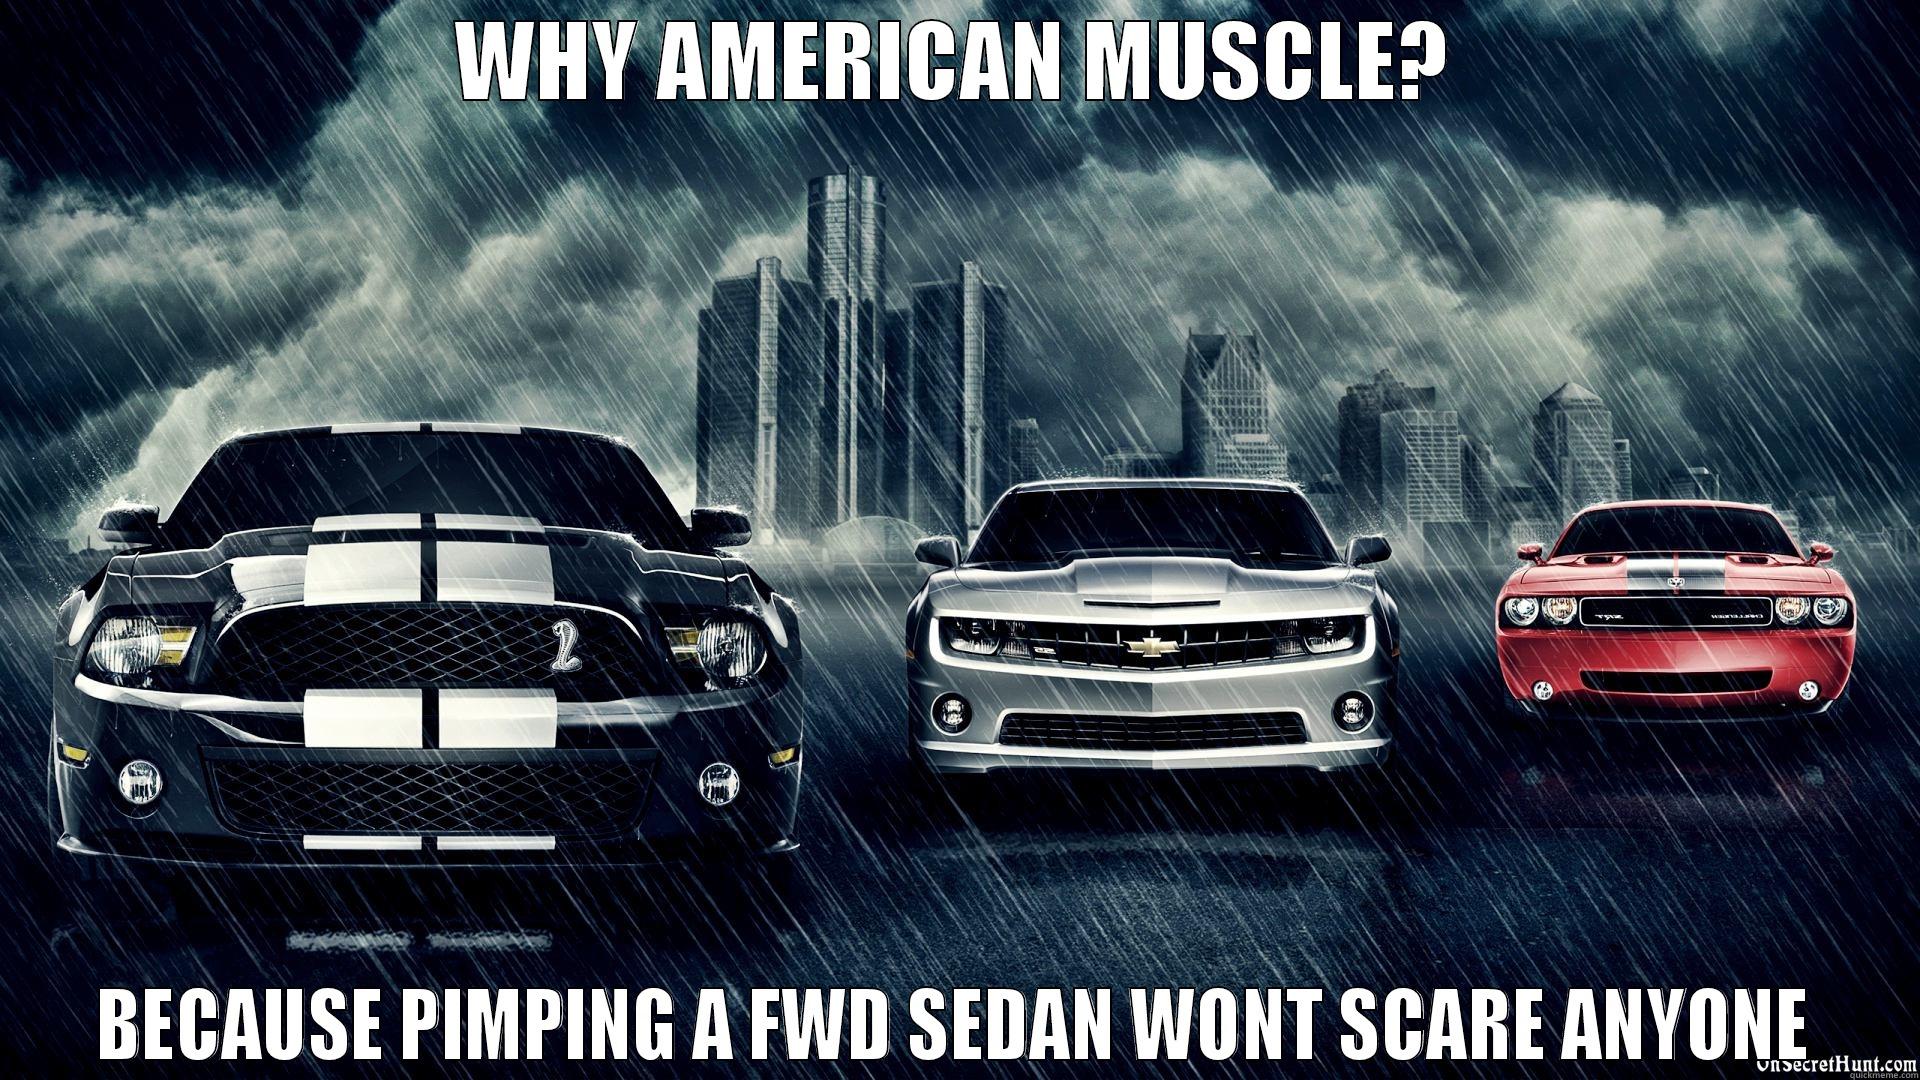 BECAUSE MUSCLE - WHY AMERICAN MUSCLE? BECAUSE PIMPING A FWD SEDAN WONT SCARE ANYONE Misc